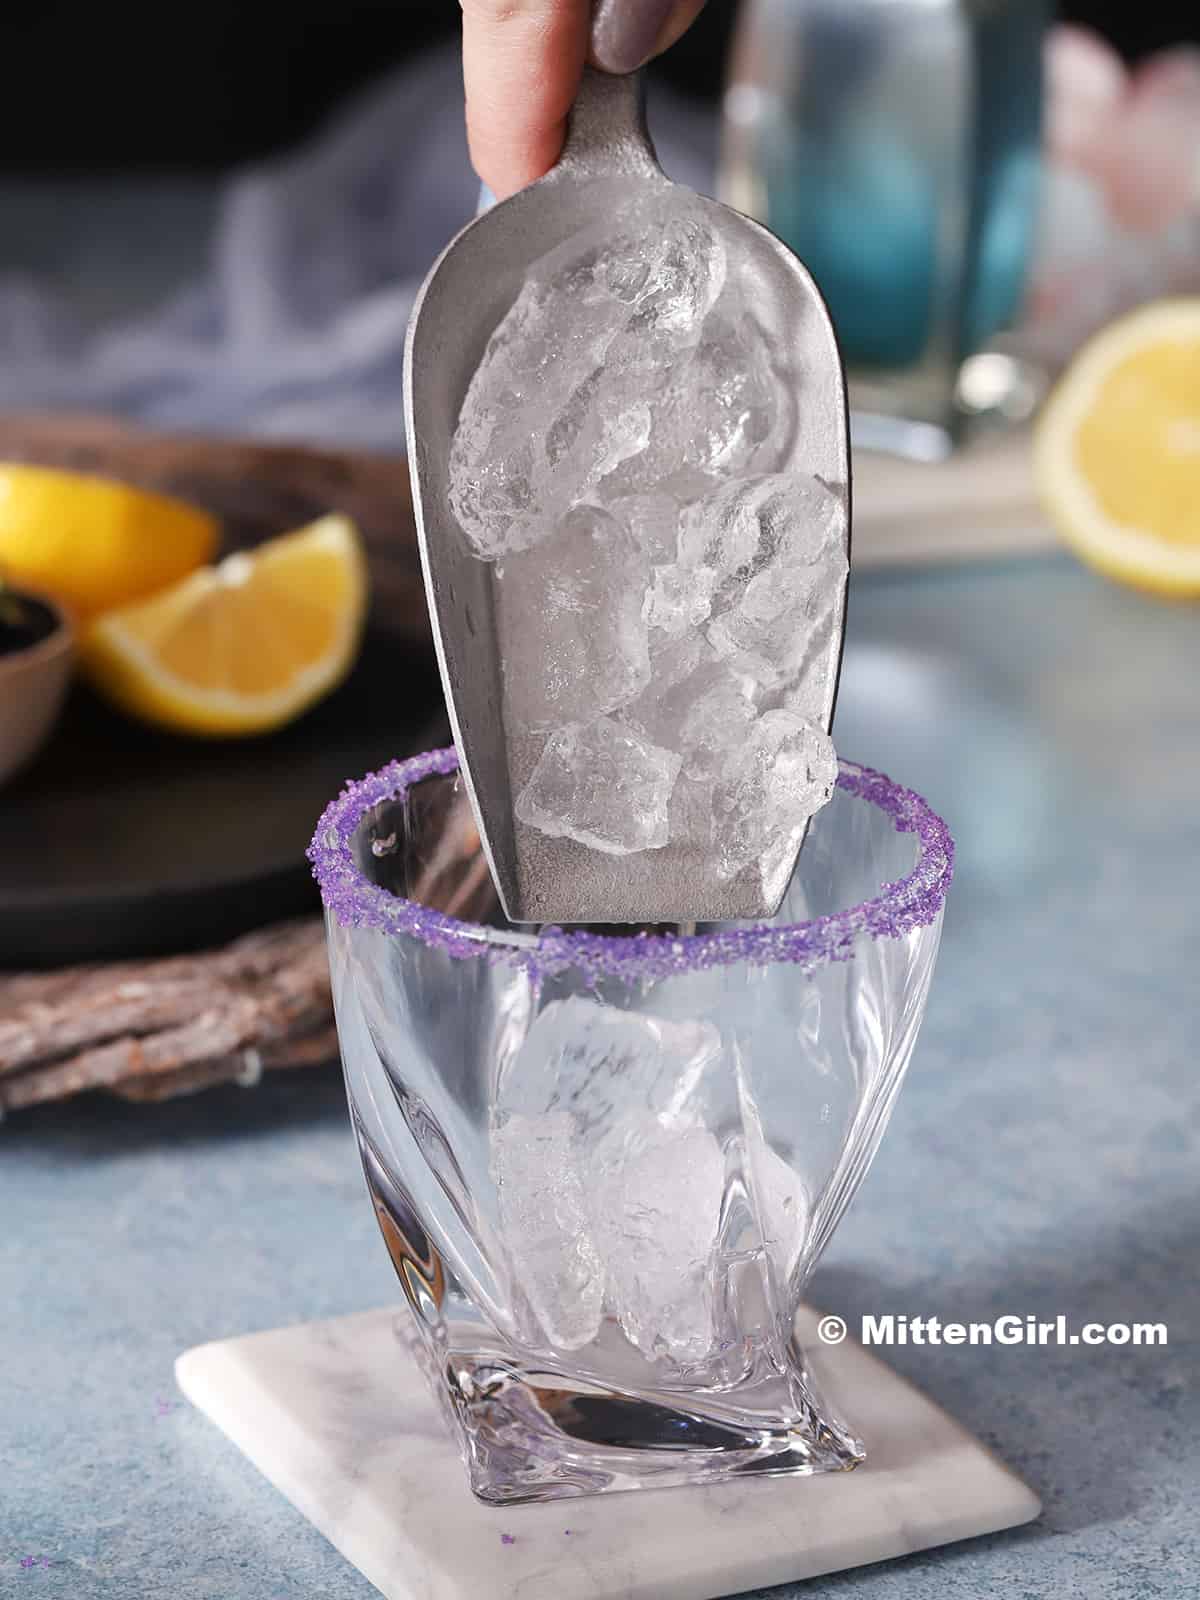 Ice being poured into a rocks glass.